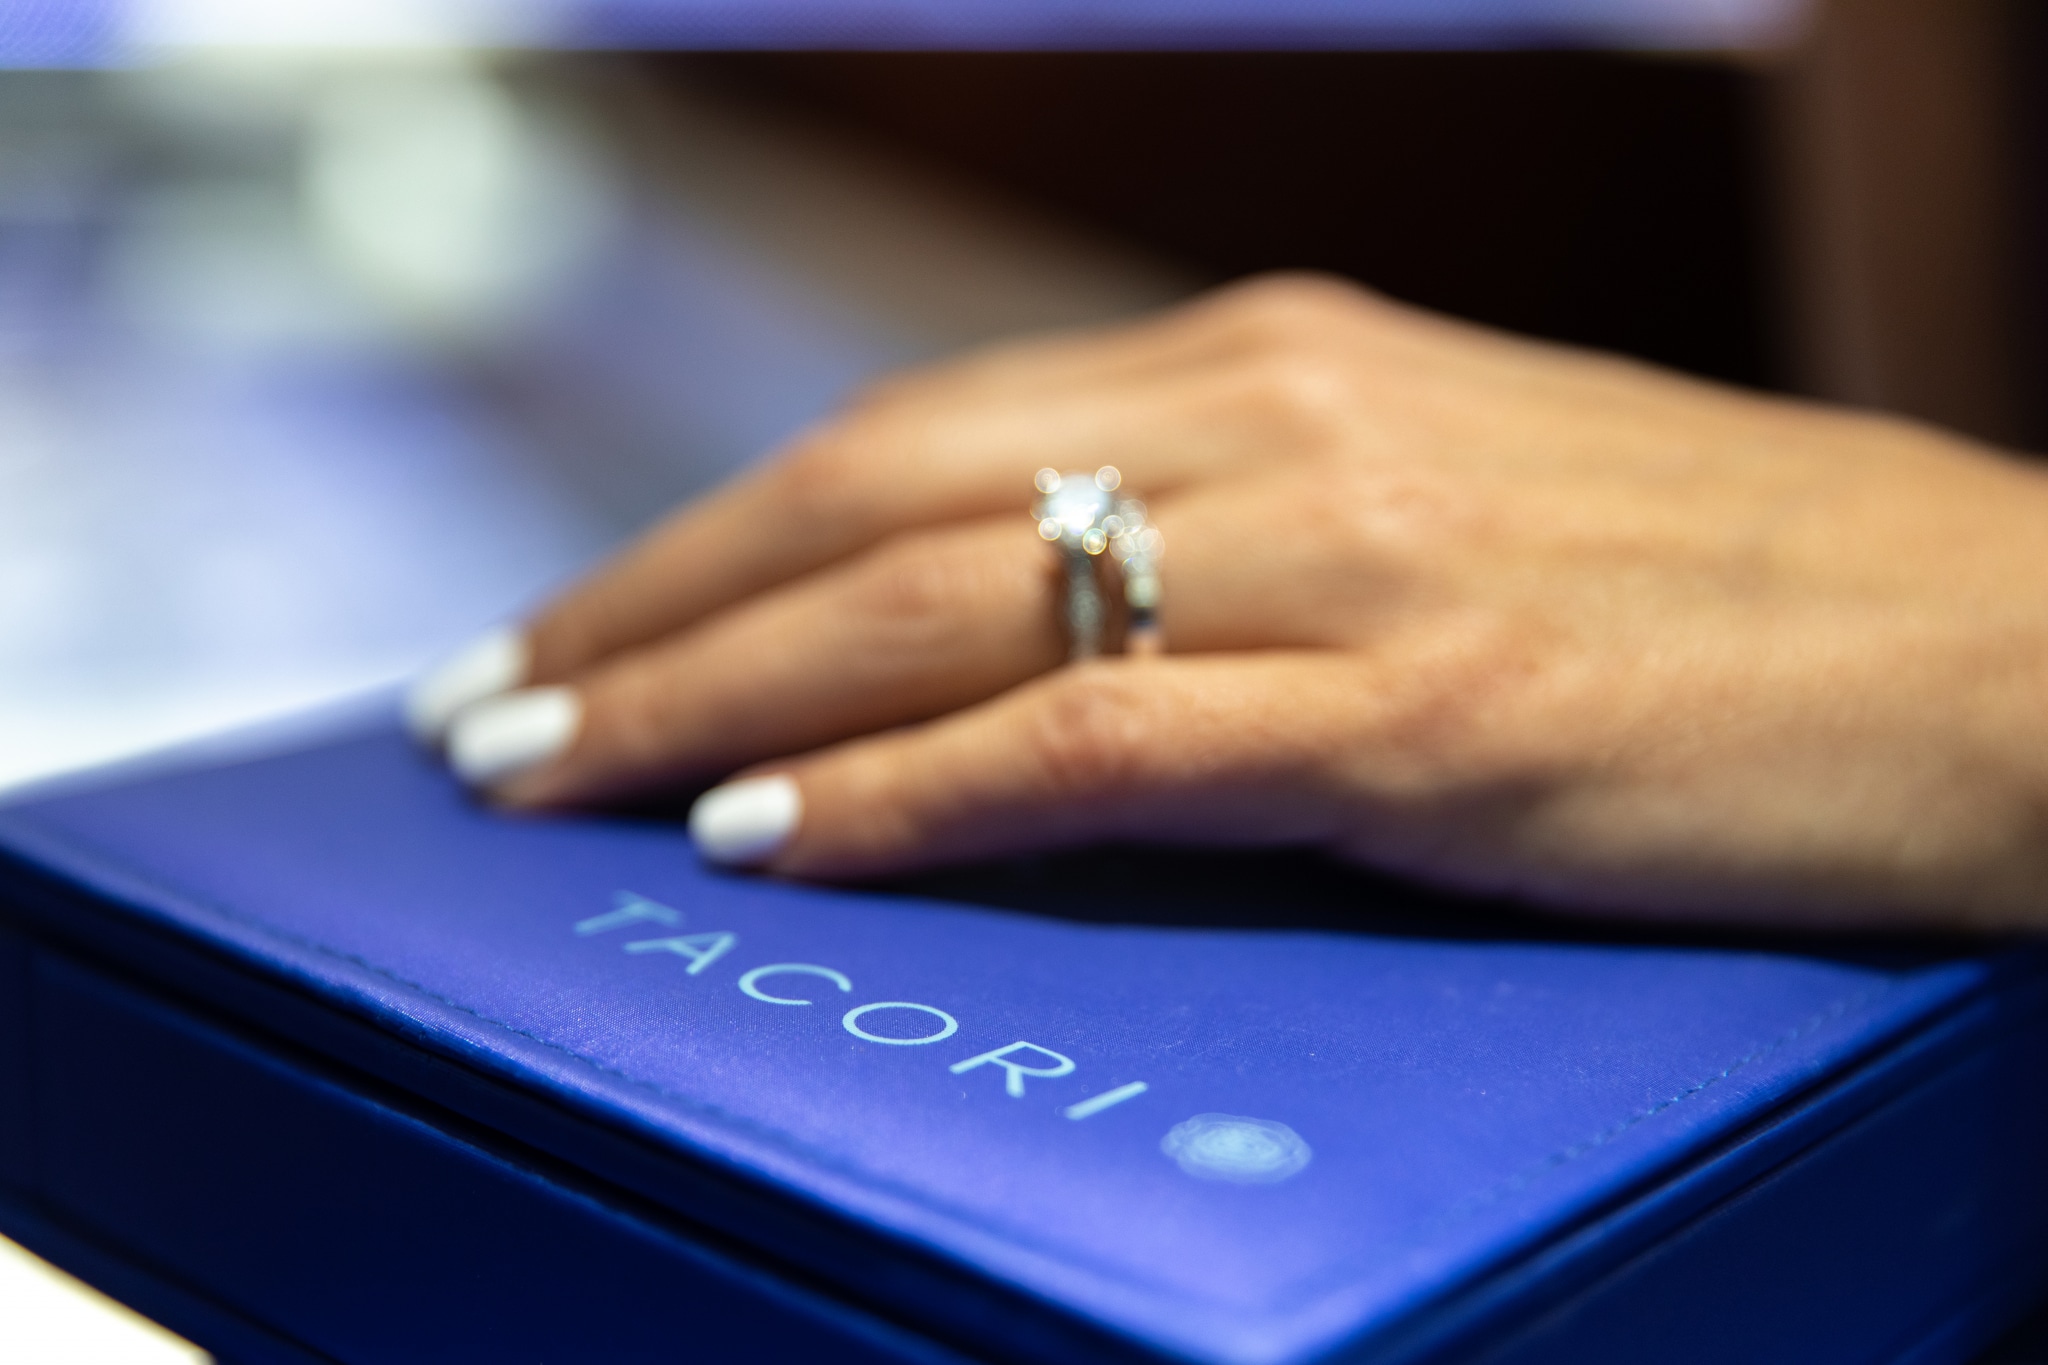 image 15 3 Don’t miss Tacori at Diamonds Direct in Birmingham Sept. 13-14. Free gifts + 0% APR for 5 years!